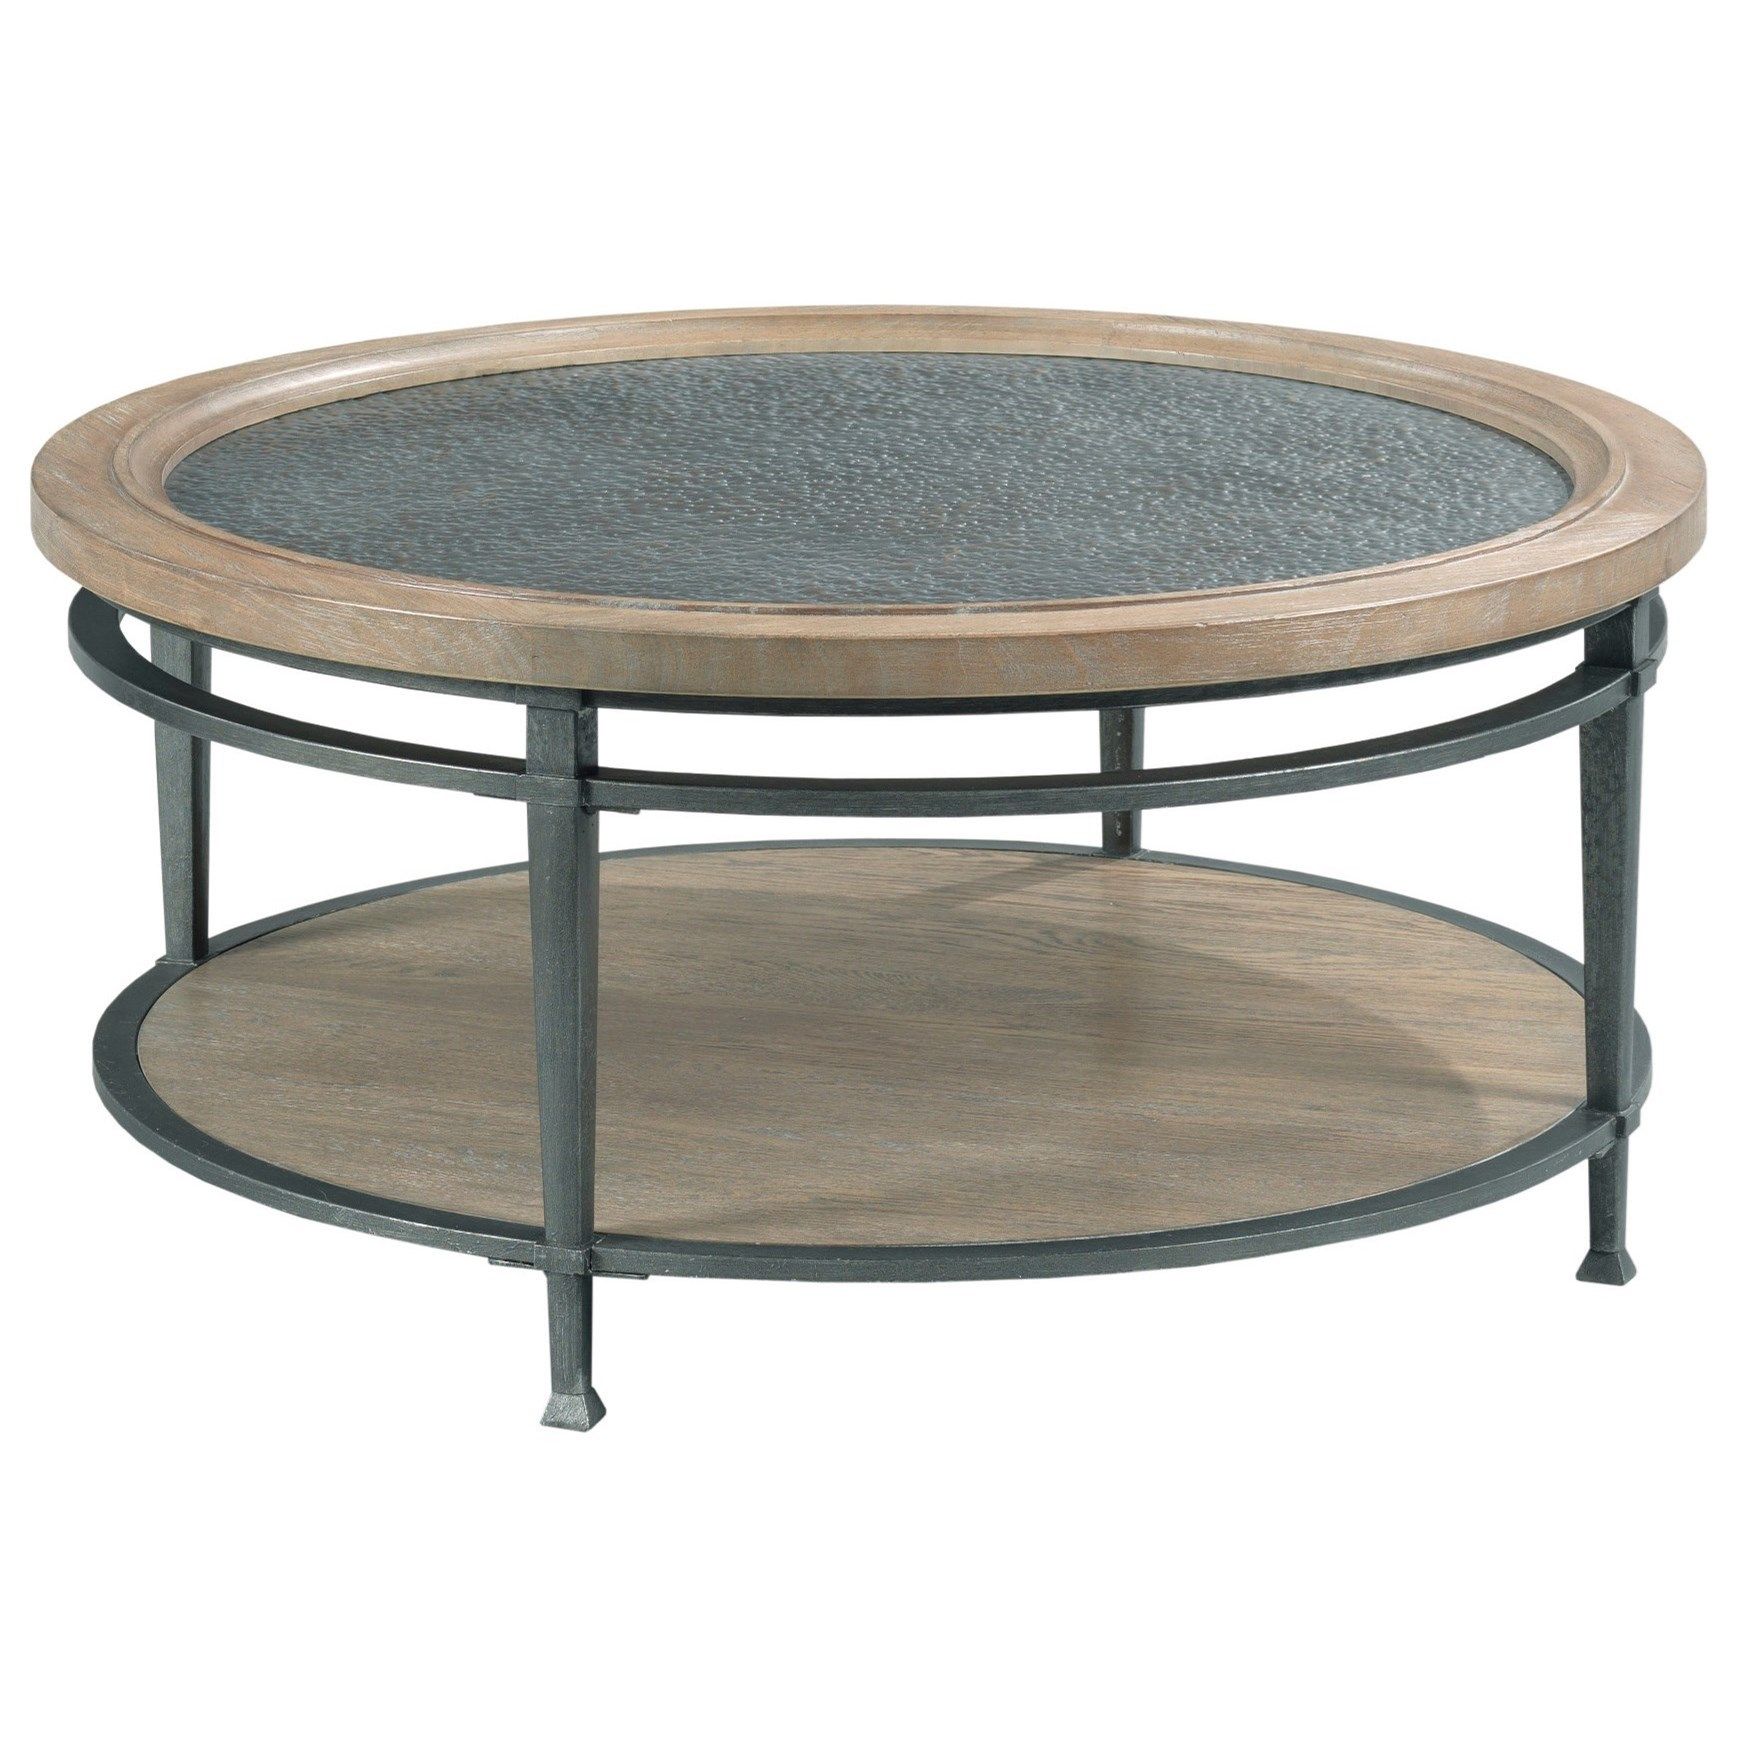 Hammary Austin Transitional Round Coffee Table | Wilson's Furniture Throughout American Heritage Round Coffee Tables (Photo 13 of 15)